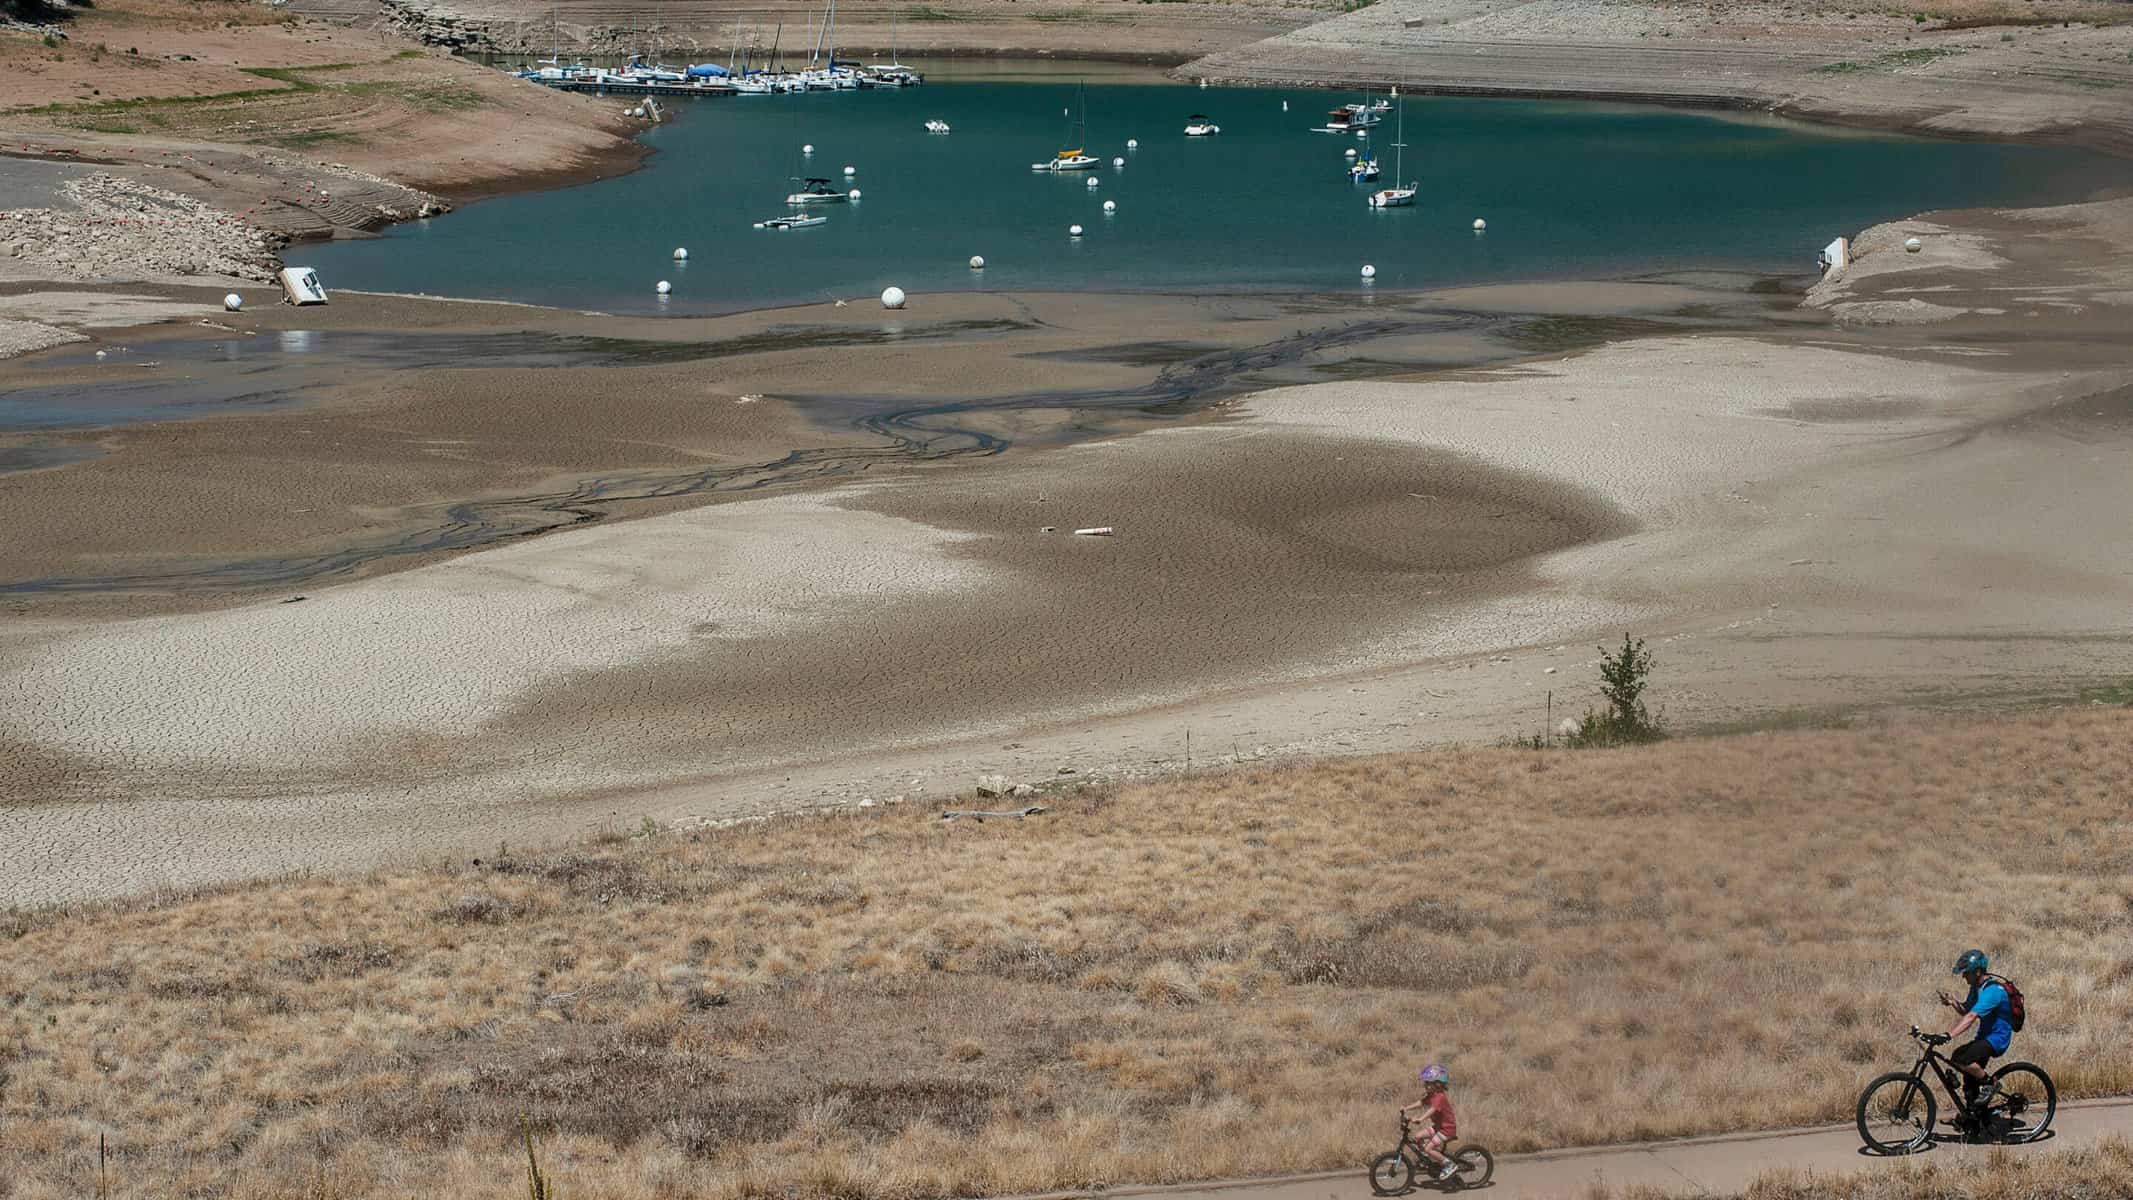 Plan for Colorado River could take from Blue Mesa, Flaming Gorge reservoirs